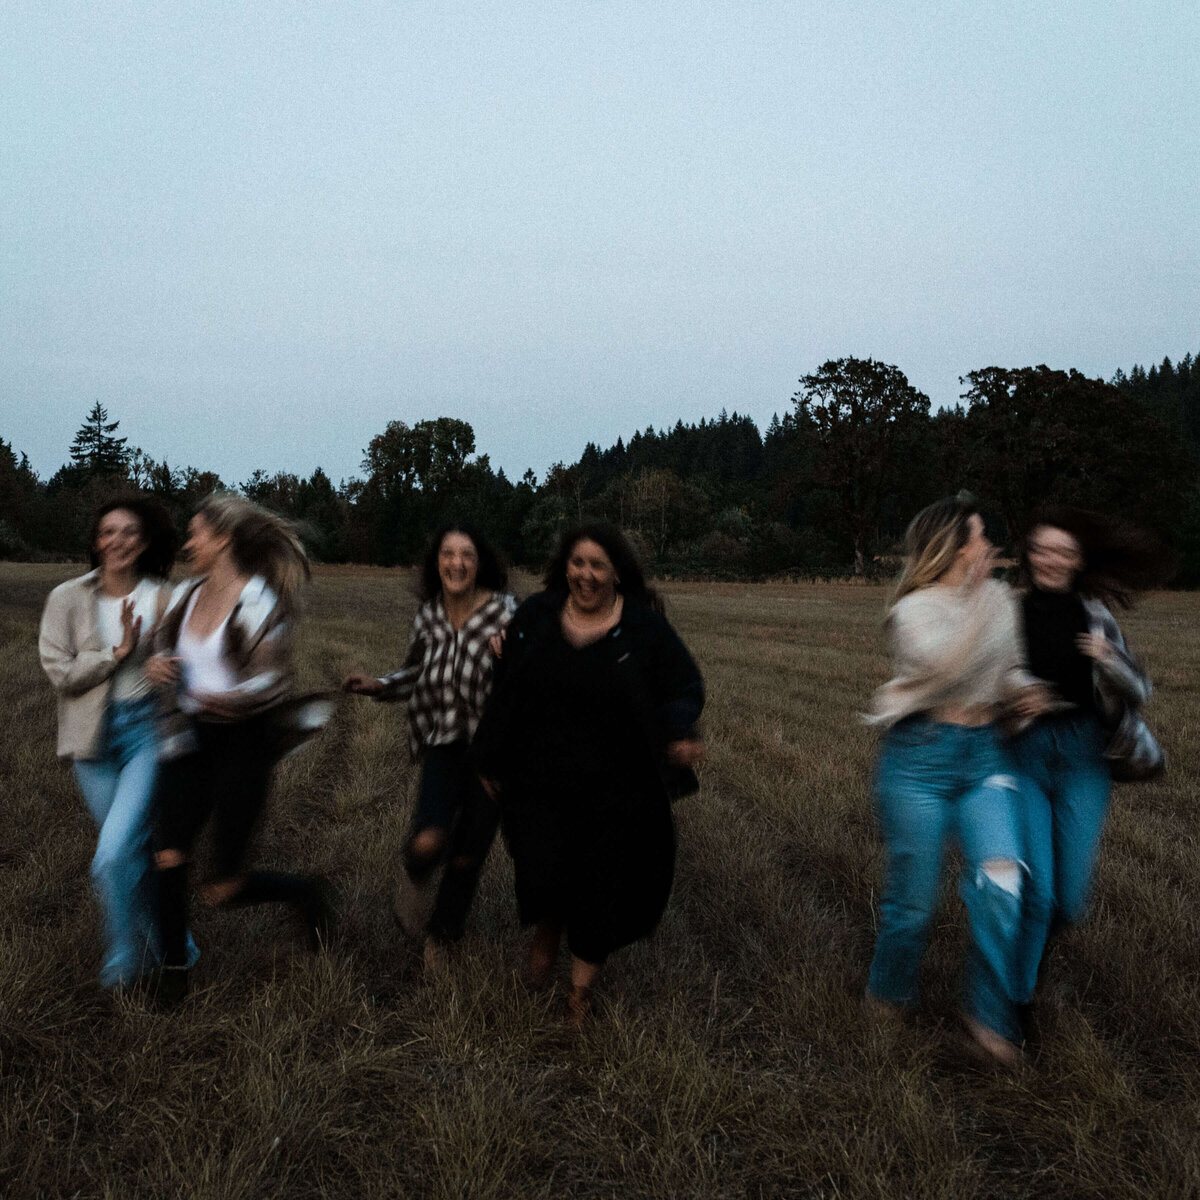 Group of girls run through a field for a motion blurred cinematic photo